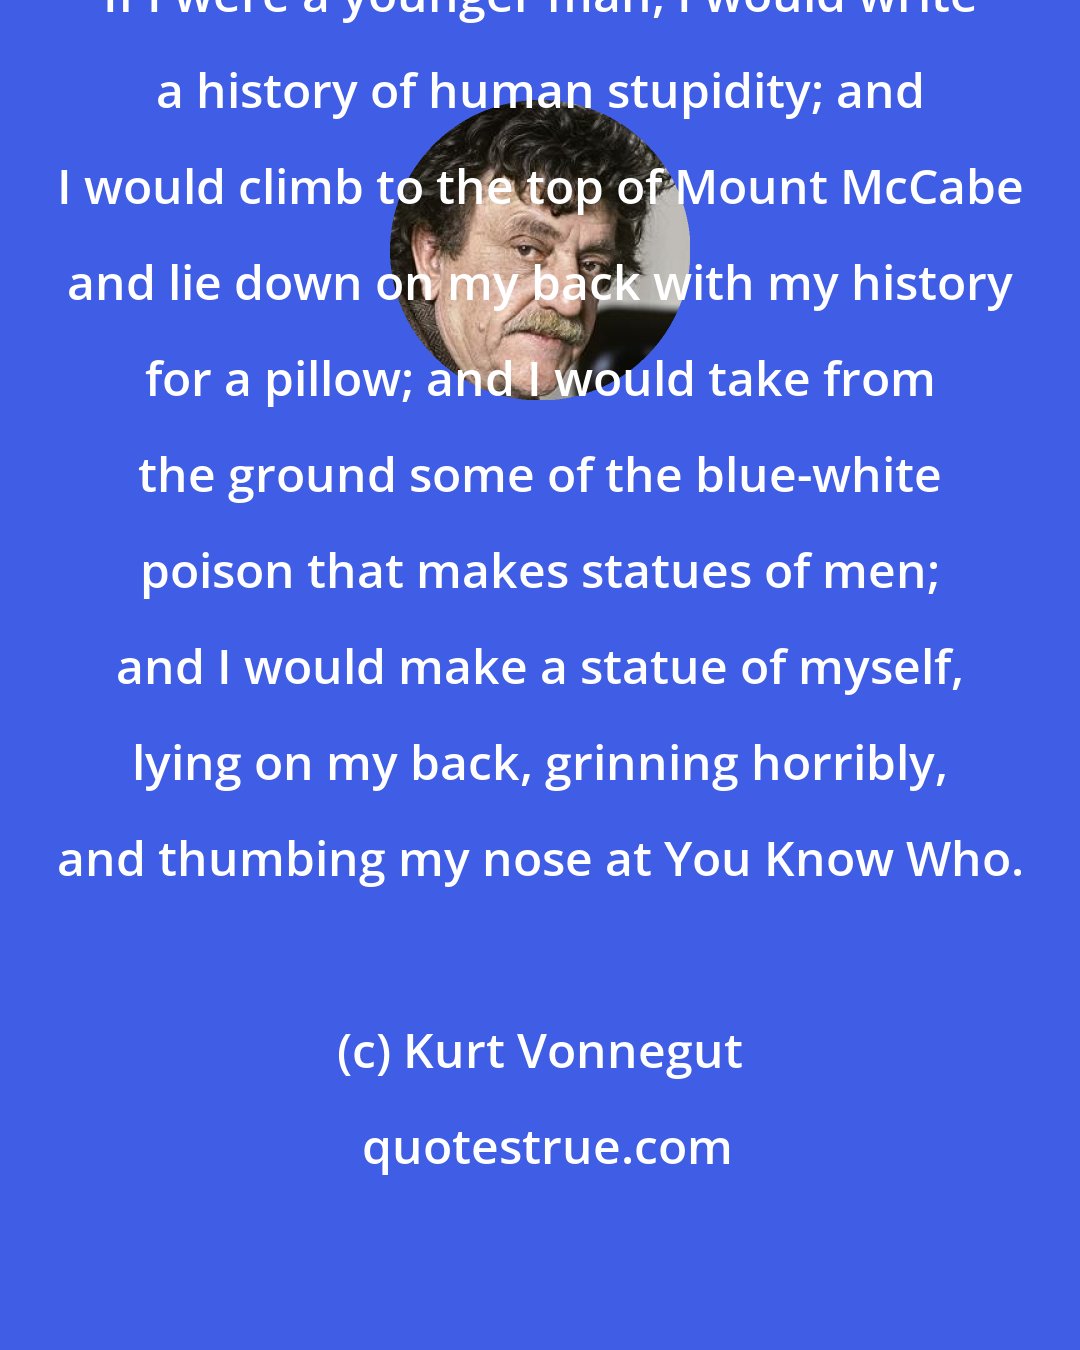 Kurt Vonnegut: If I were a younger man, I would write a history of human stupidity; and I would climb to the top of Mount McCabe and lie down on my back with my history for a pillow; and I would take from the ground some of the blue-white poison that makes statues of men; and I would make a statue of myself, lying on my back, grinning horribly, and thumbing my nose at You Know Who.